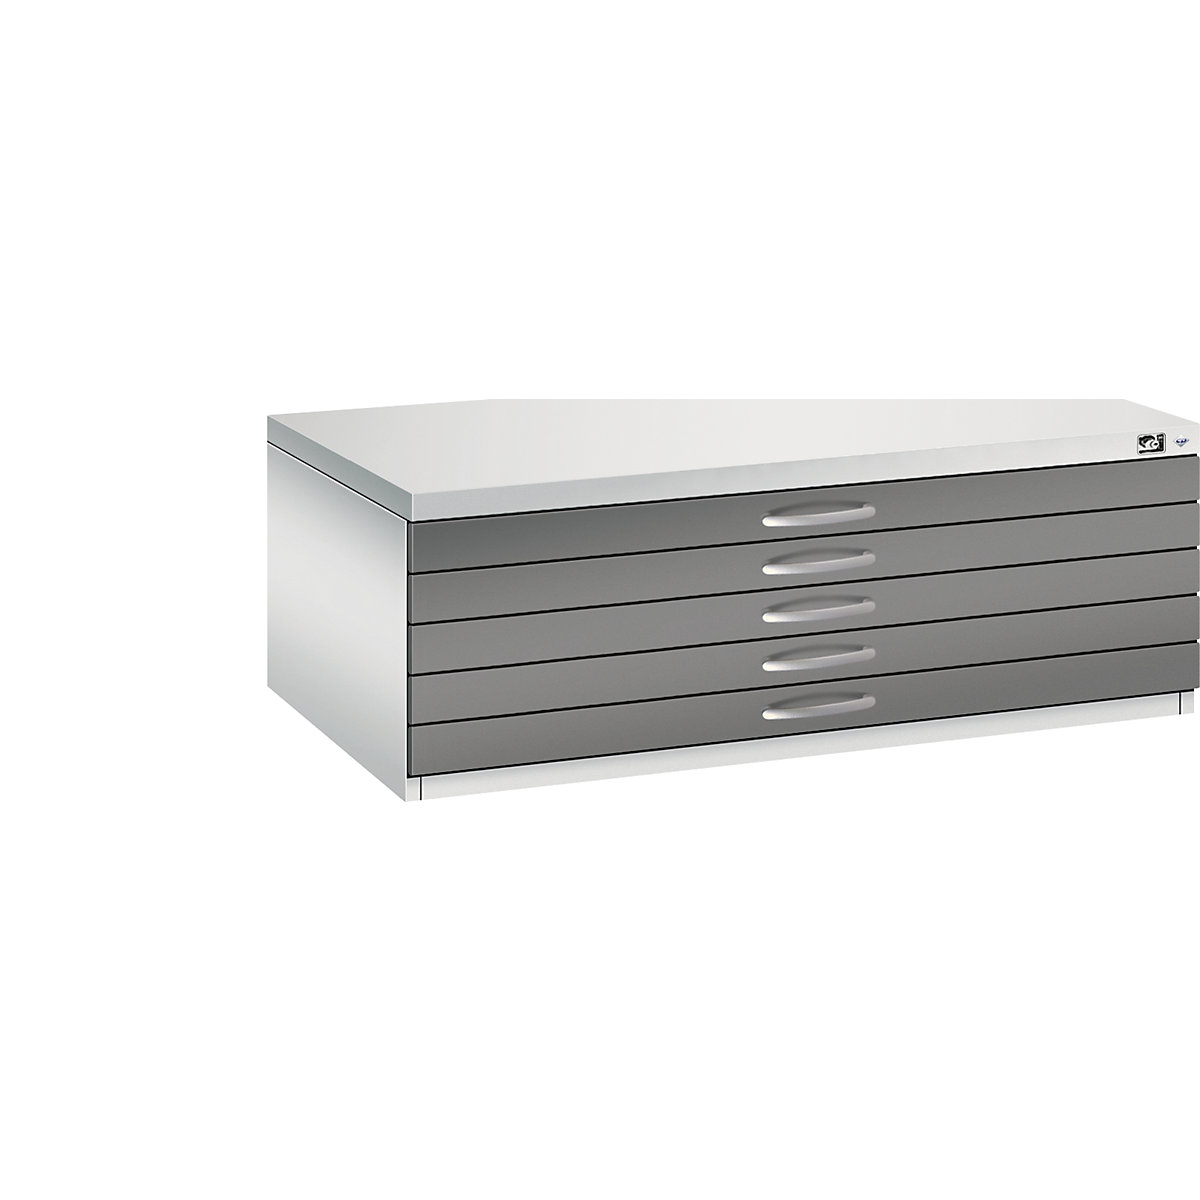 Drawing cabinet – C+P, A1, 5 drawers, height 420 mm, light grey / volcanic grey-17